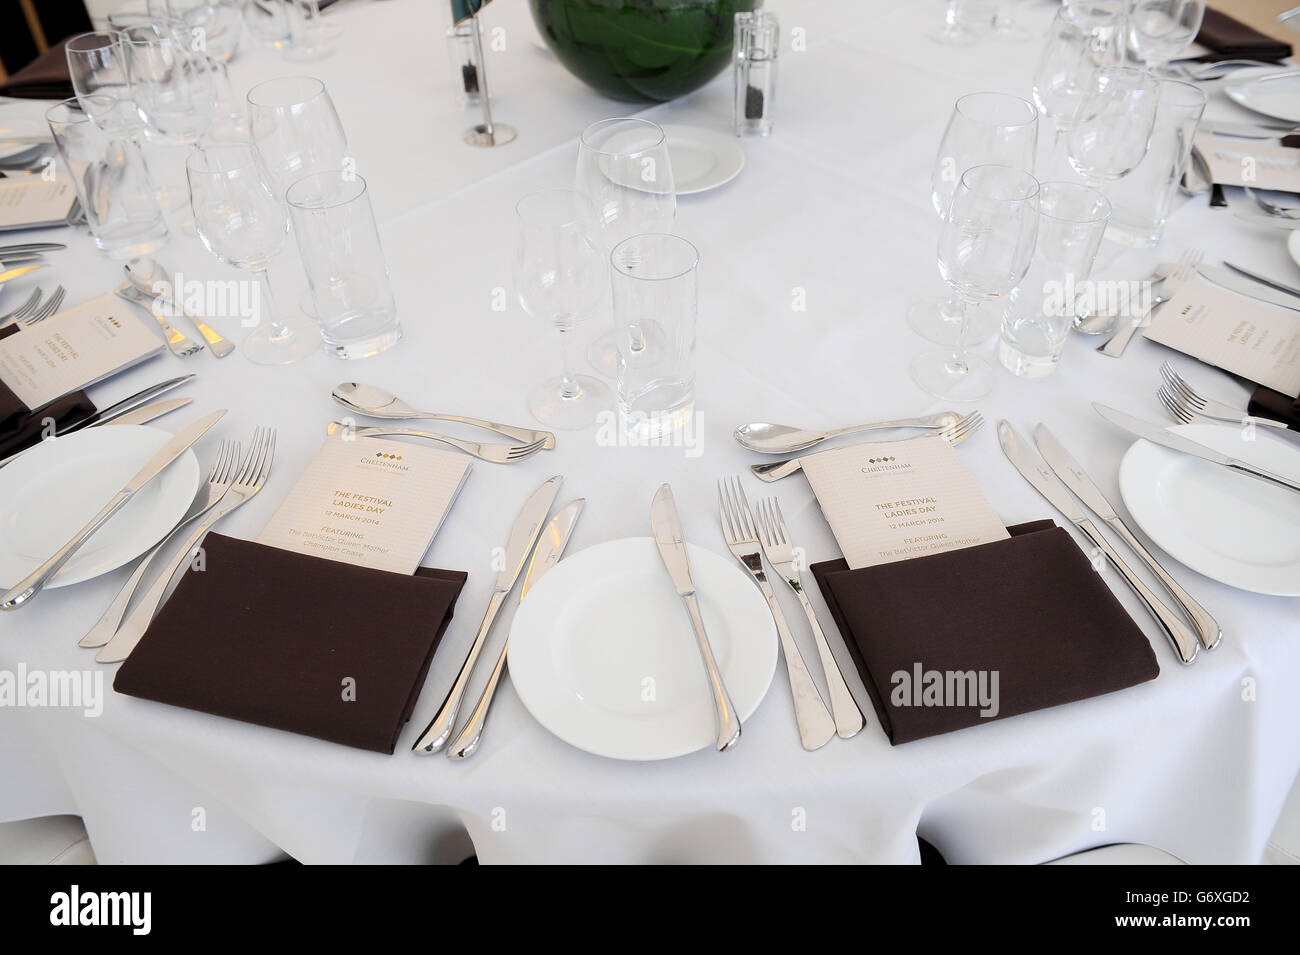 Table placings set out to receive guests in the Fairlawne Restaurant Stock Photo